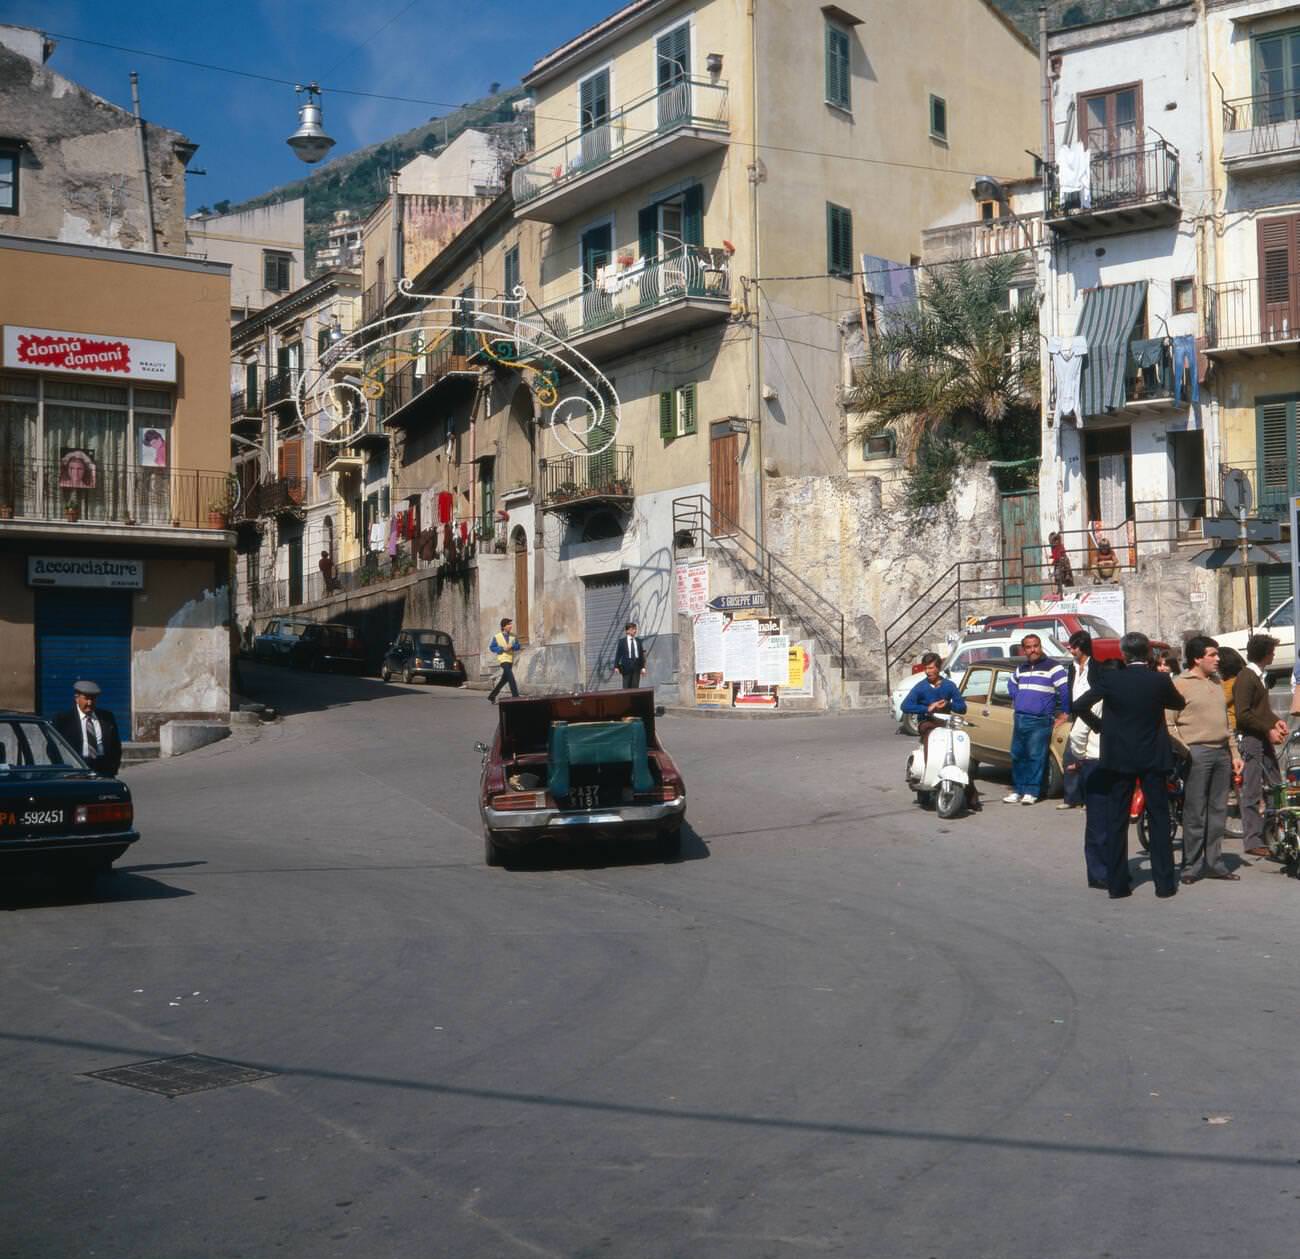 A trip to Monreale, Sicily, in the 1970s.